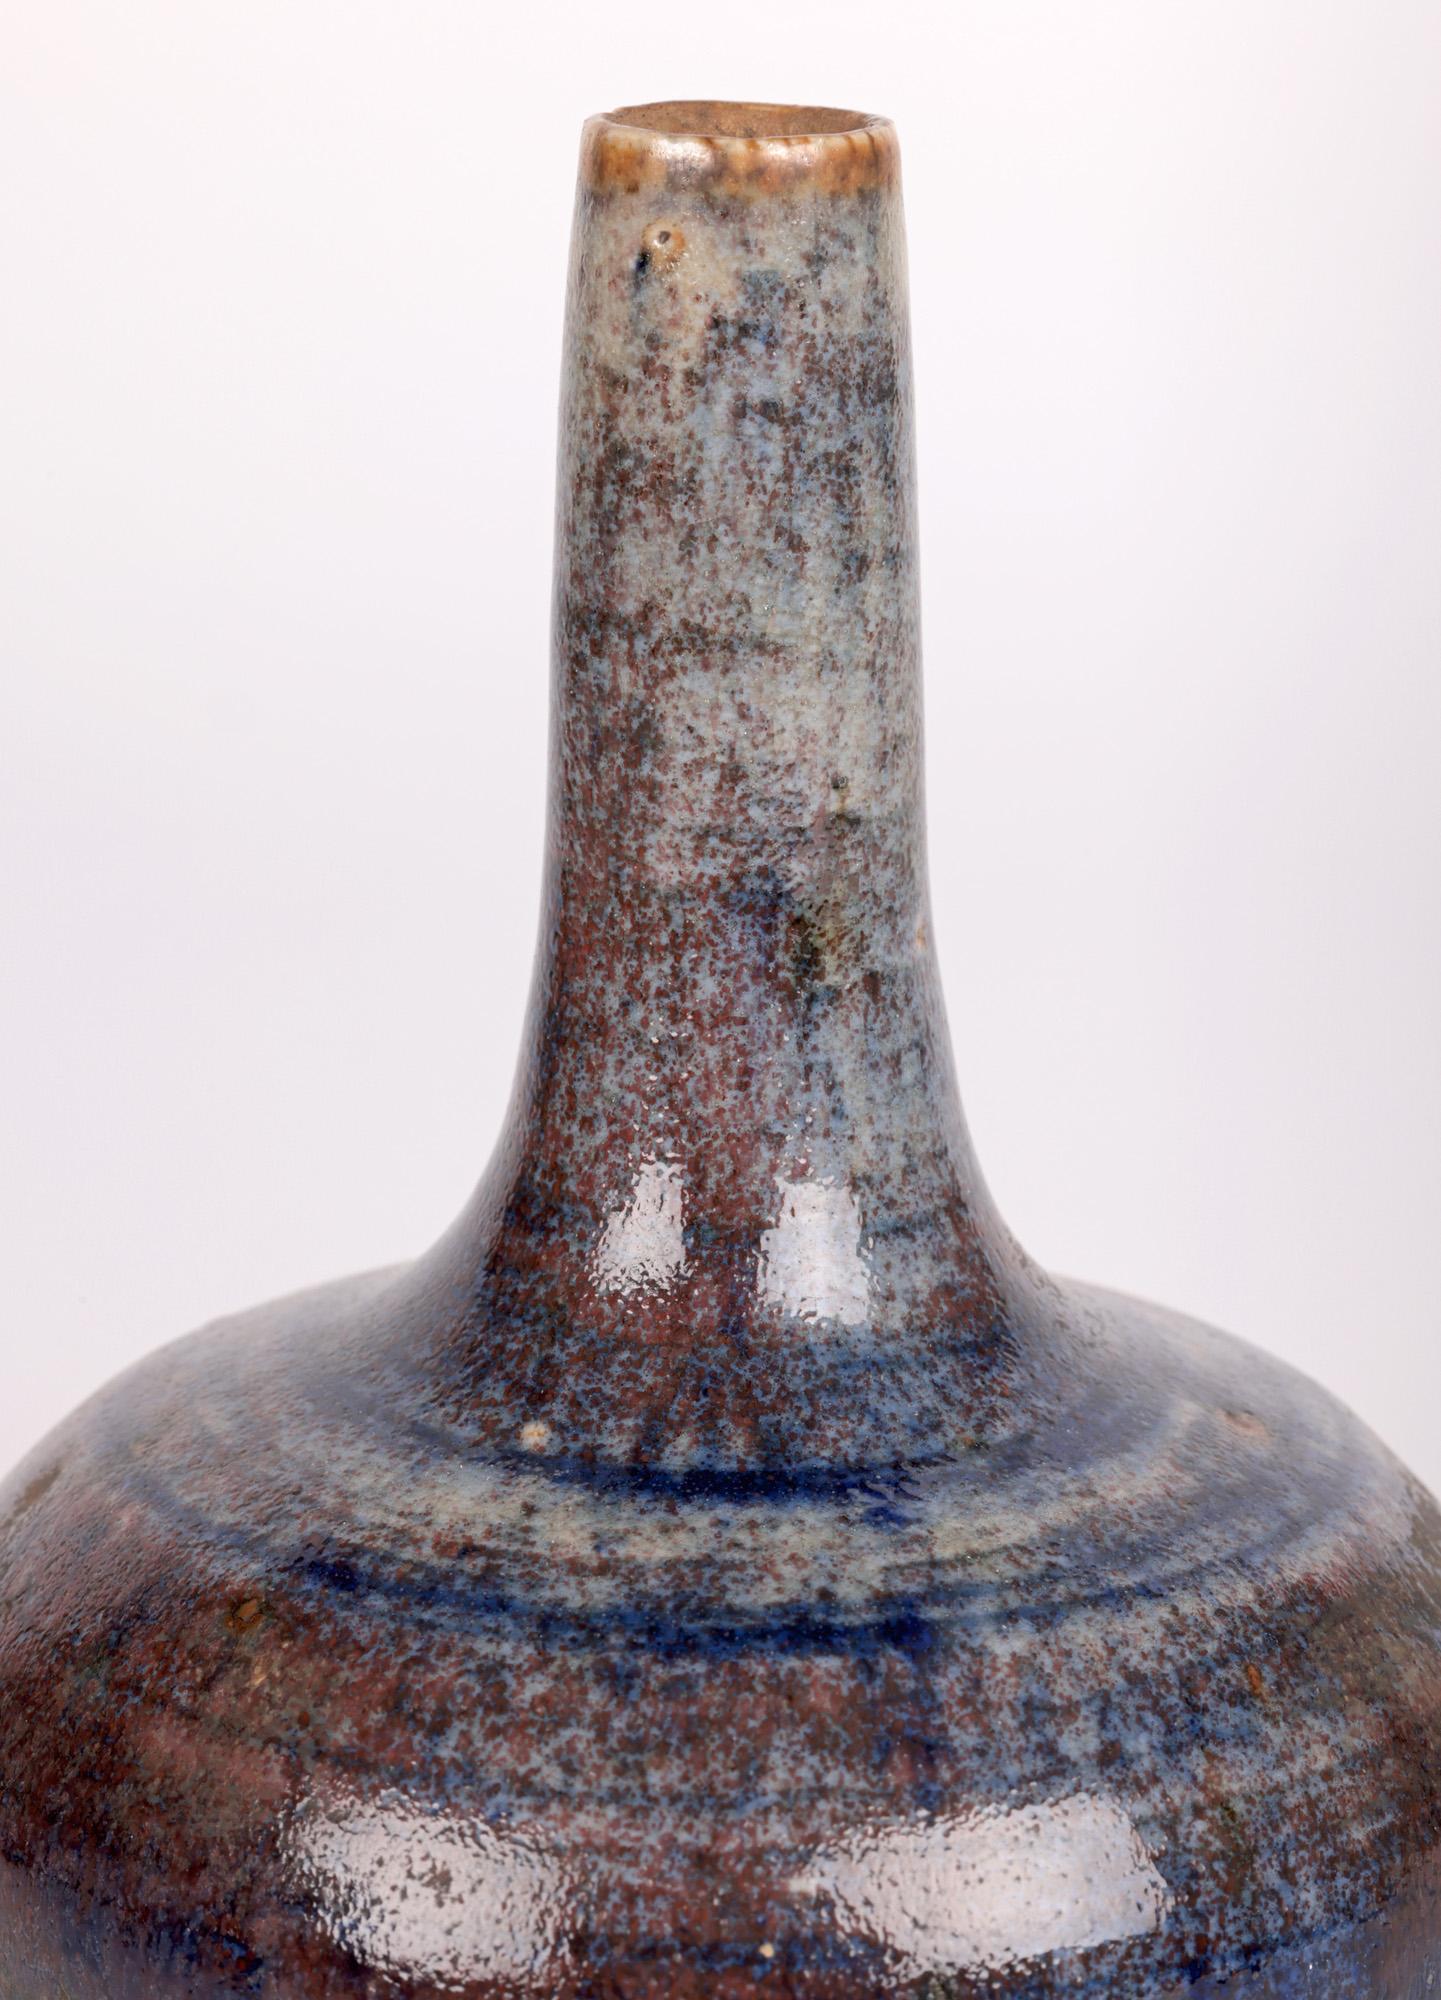 A finely potted bottle shaped bud vase decorated in blue glazes by renowned Sussex based potted Derek Davis (British, 1926-1908) and dating from around 1960. The heavily made hand-thrown stoneware vase stands on a narrow round unglazed foot rim with